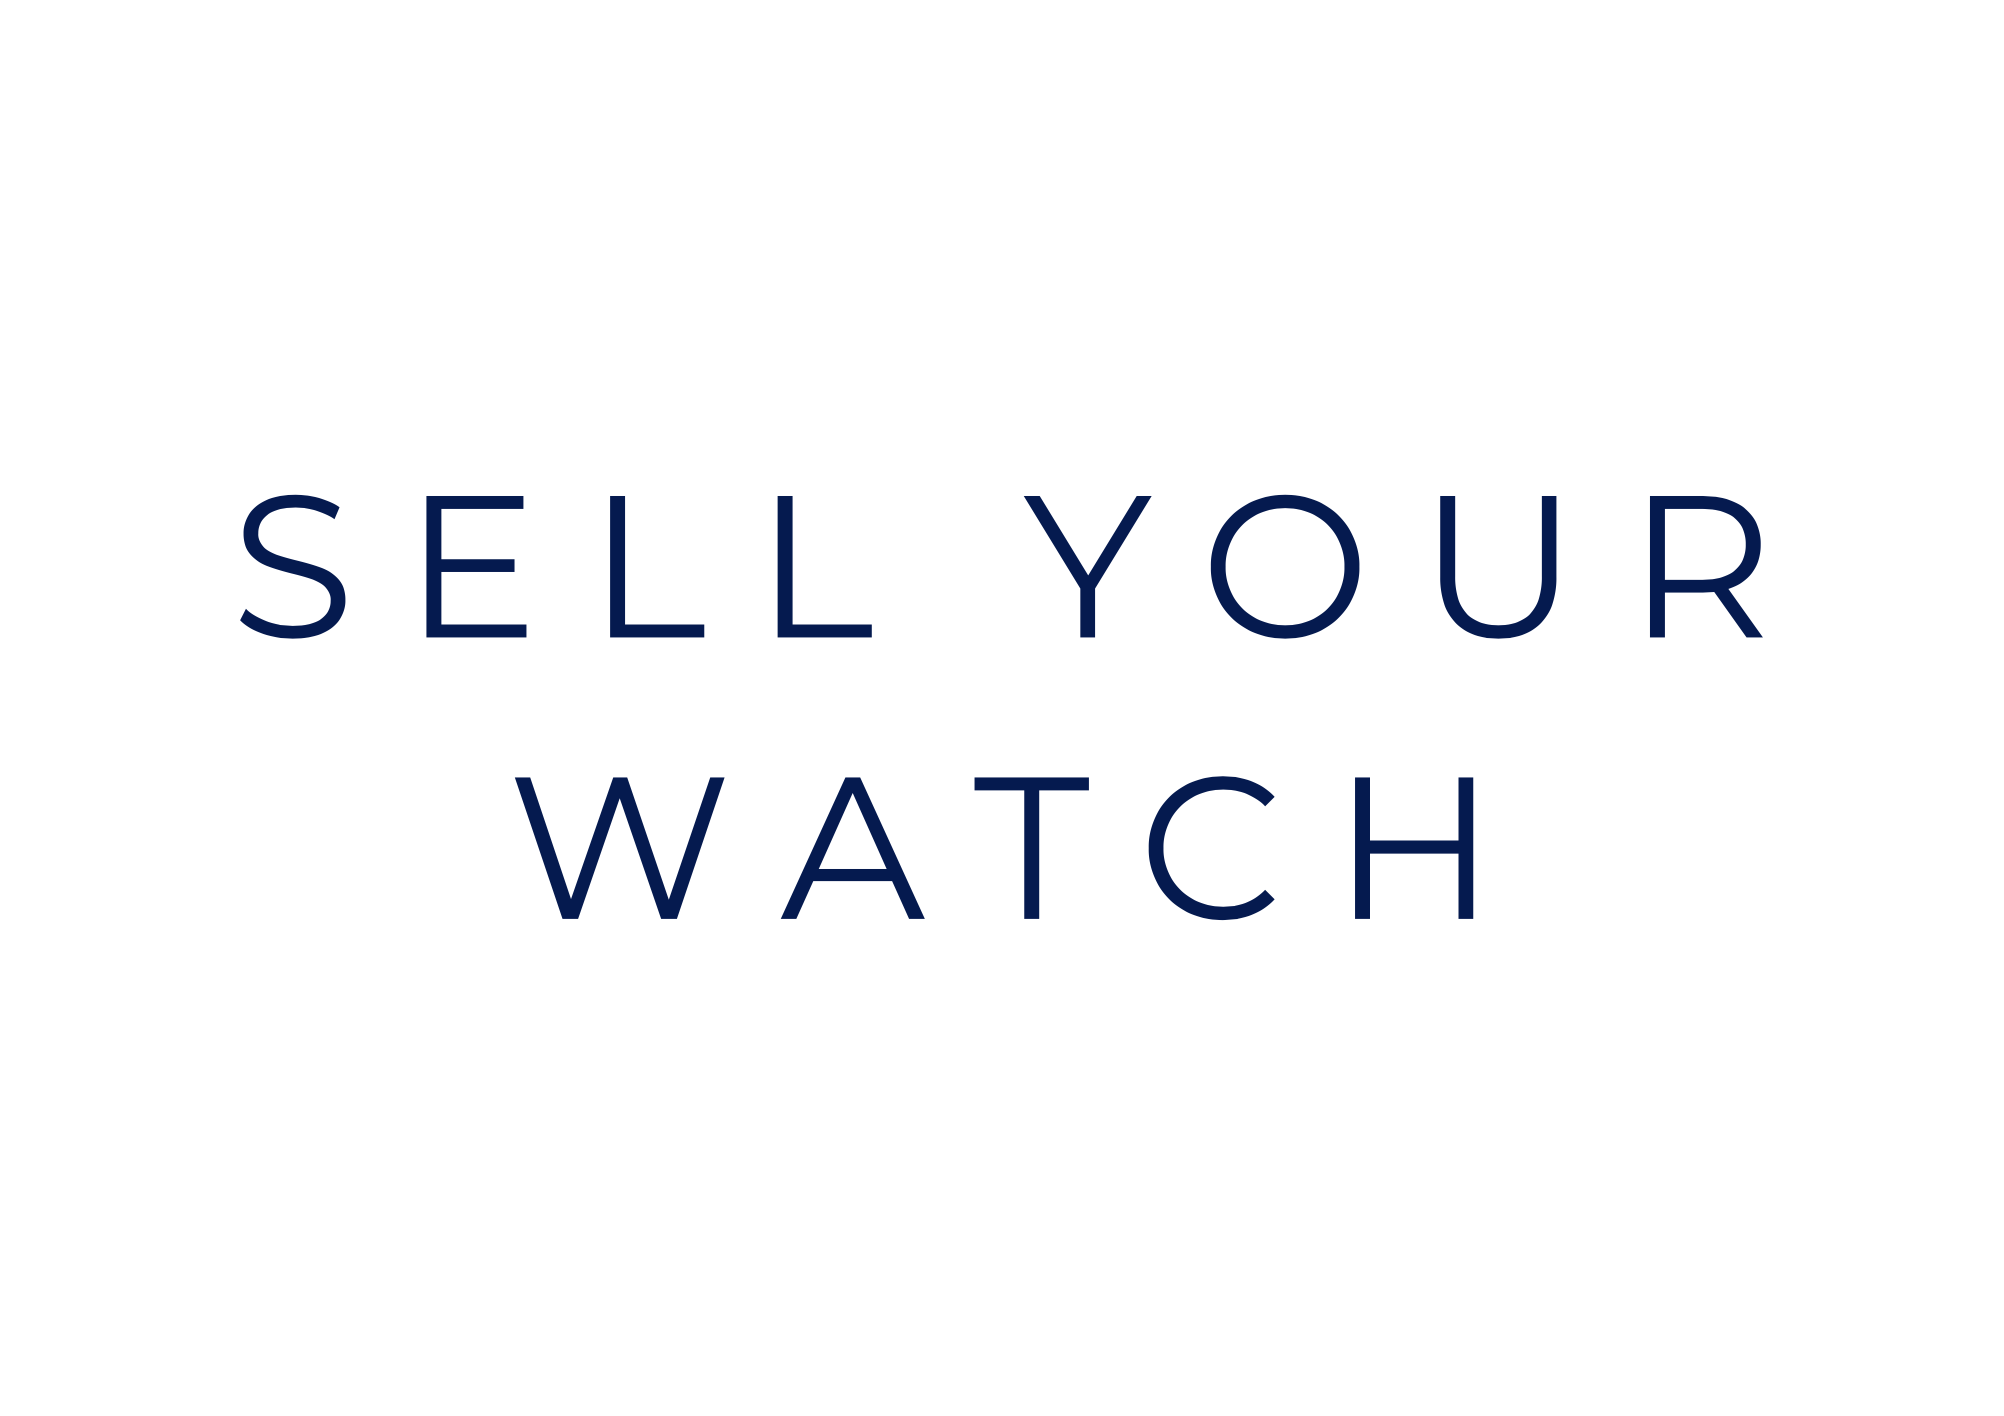 Sell your watch!